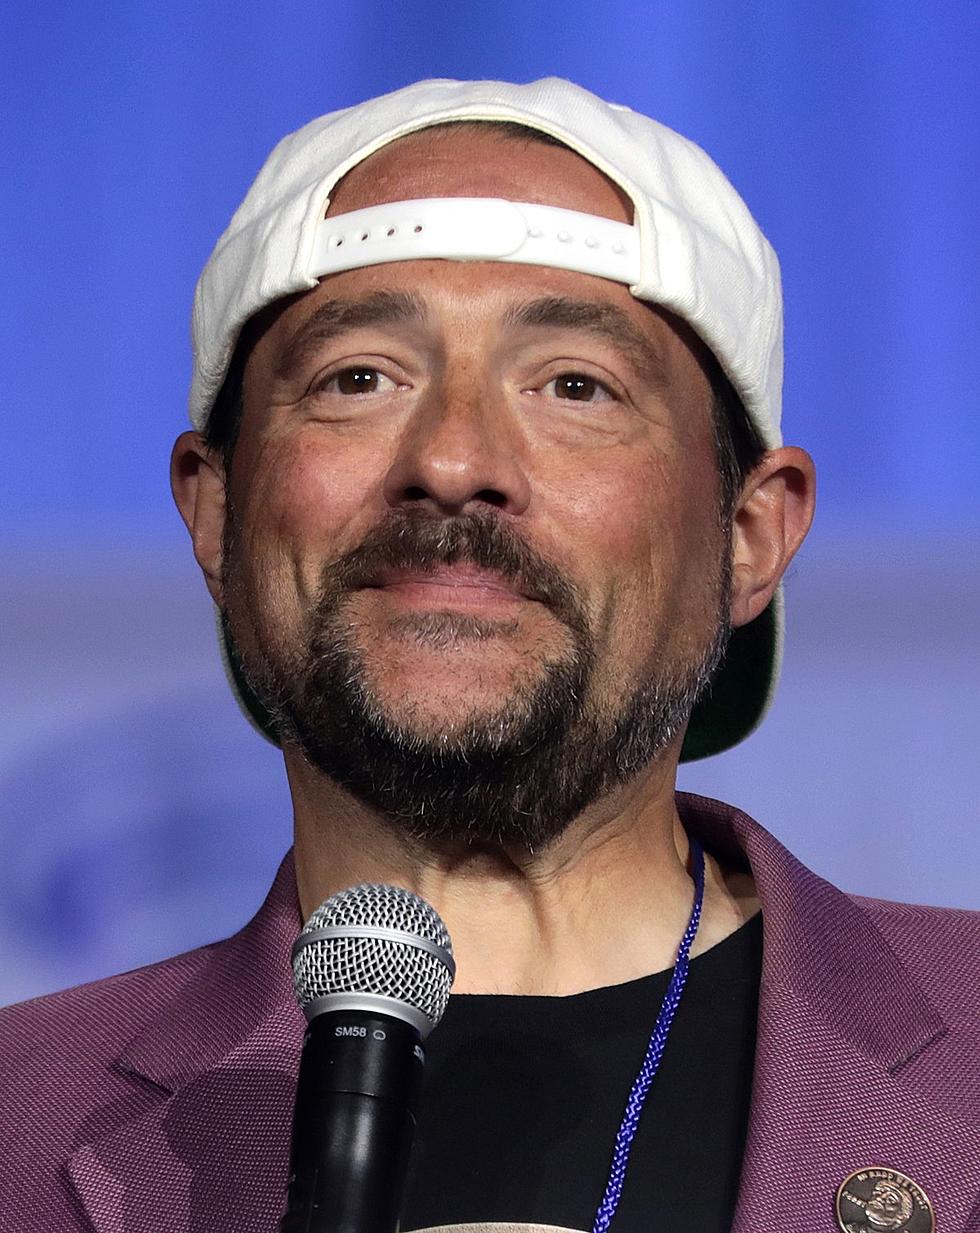 NJ&#8217;s Kevin Smith: &#8216;Take that dream right up until the end, kids&#8217;